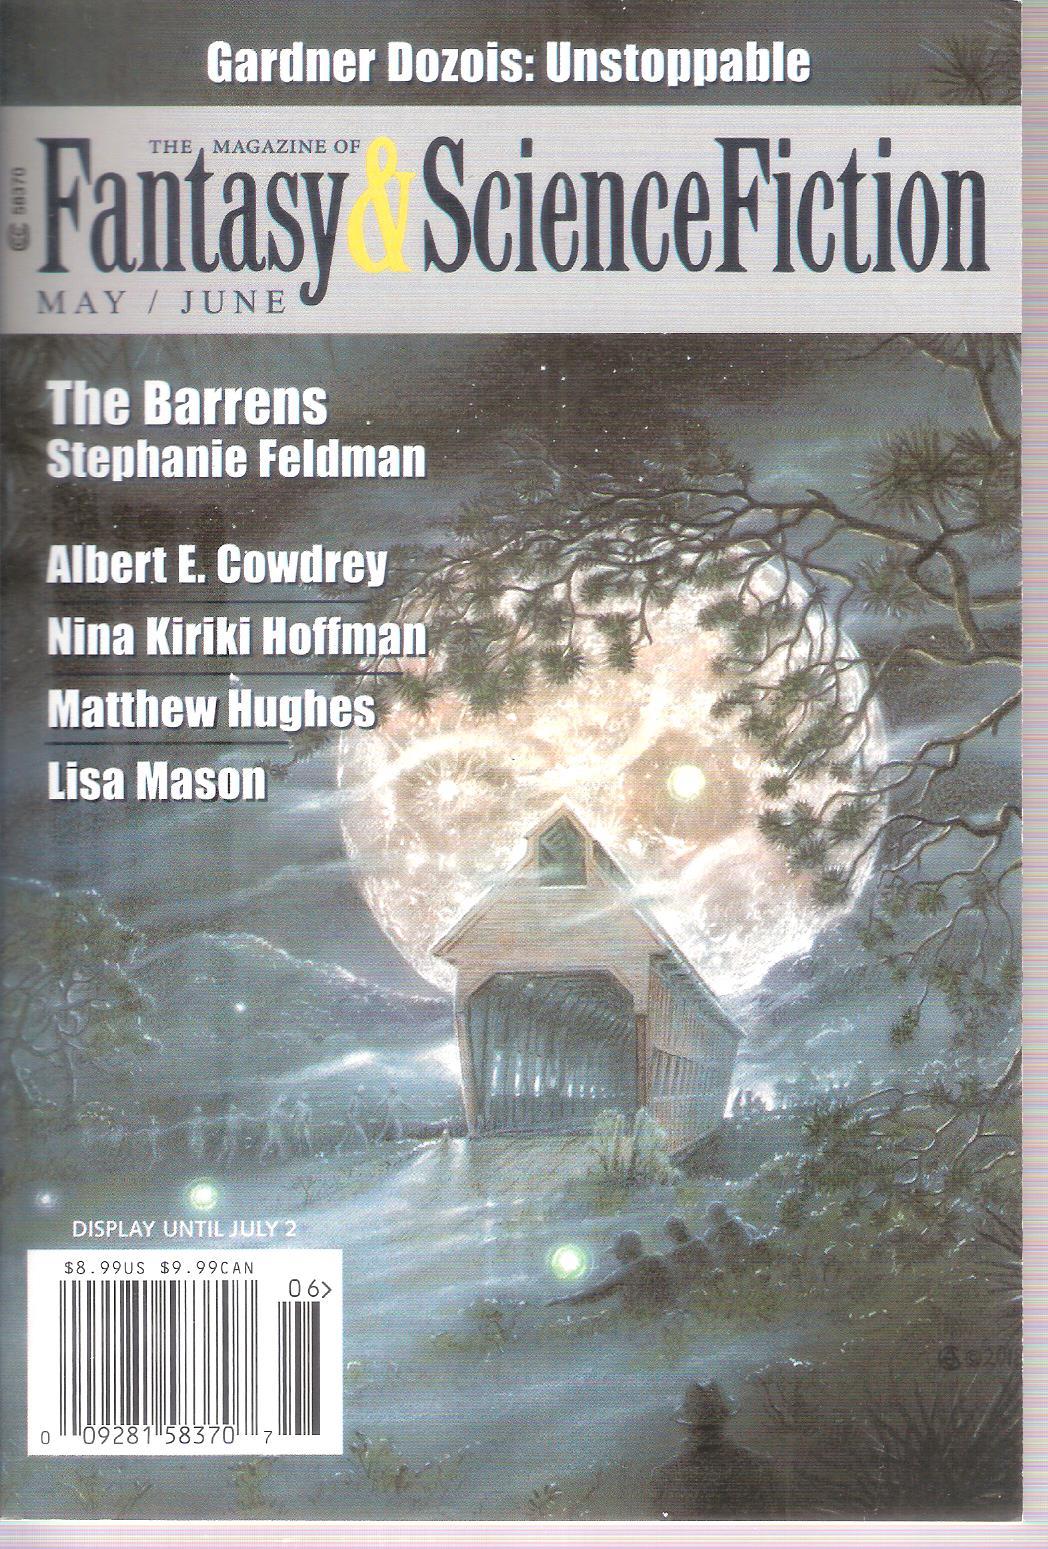 C.C. Finlay: The Magazine of Fantasy & Science Fiction, May/June 2018 (EBook, 2018, Spilogale, Inc..)